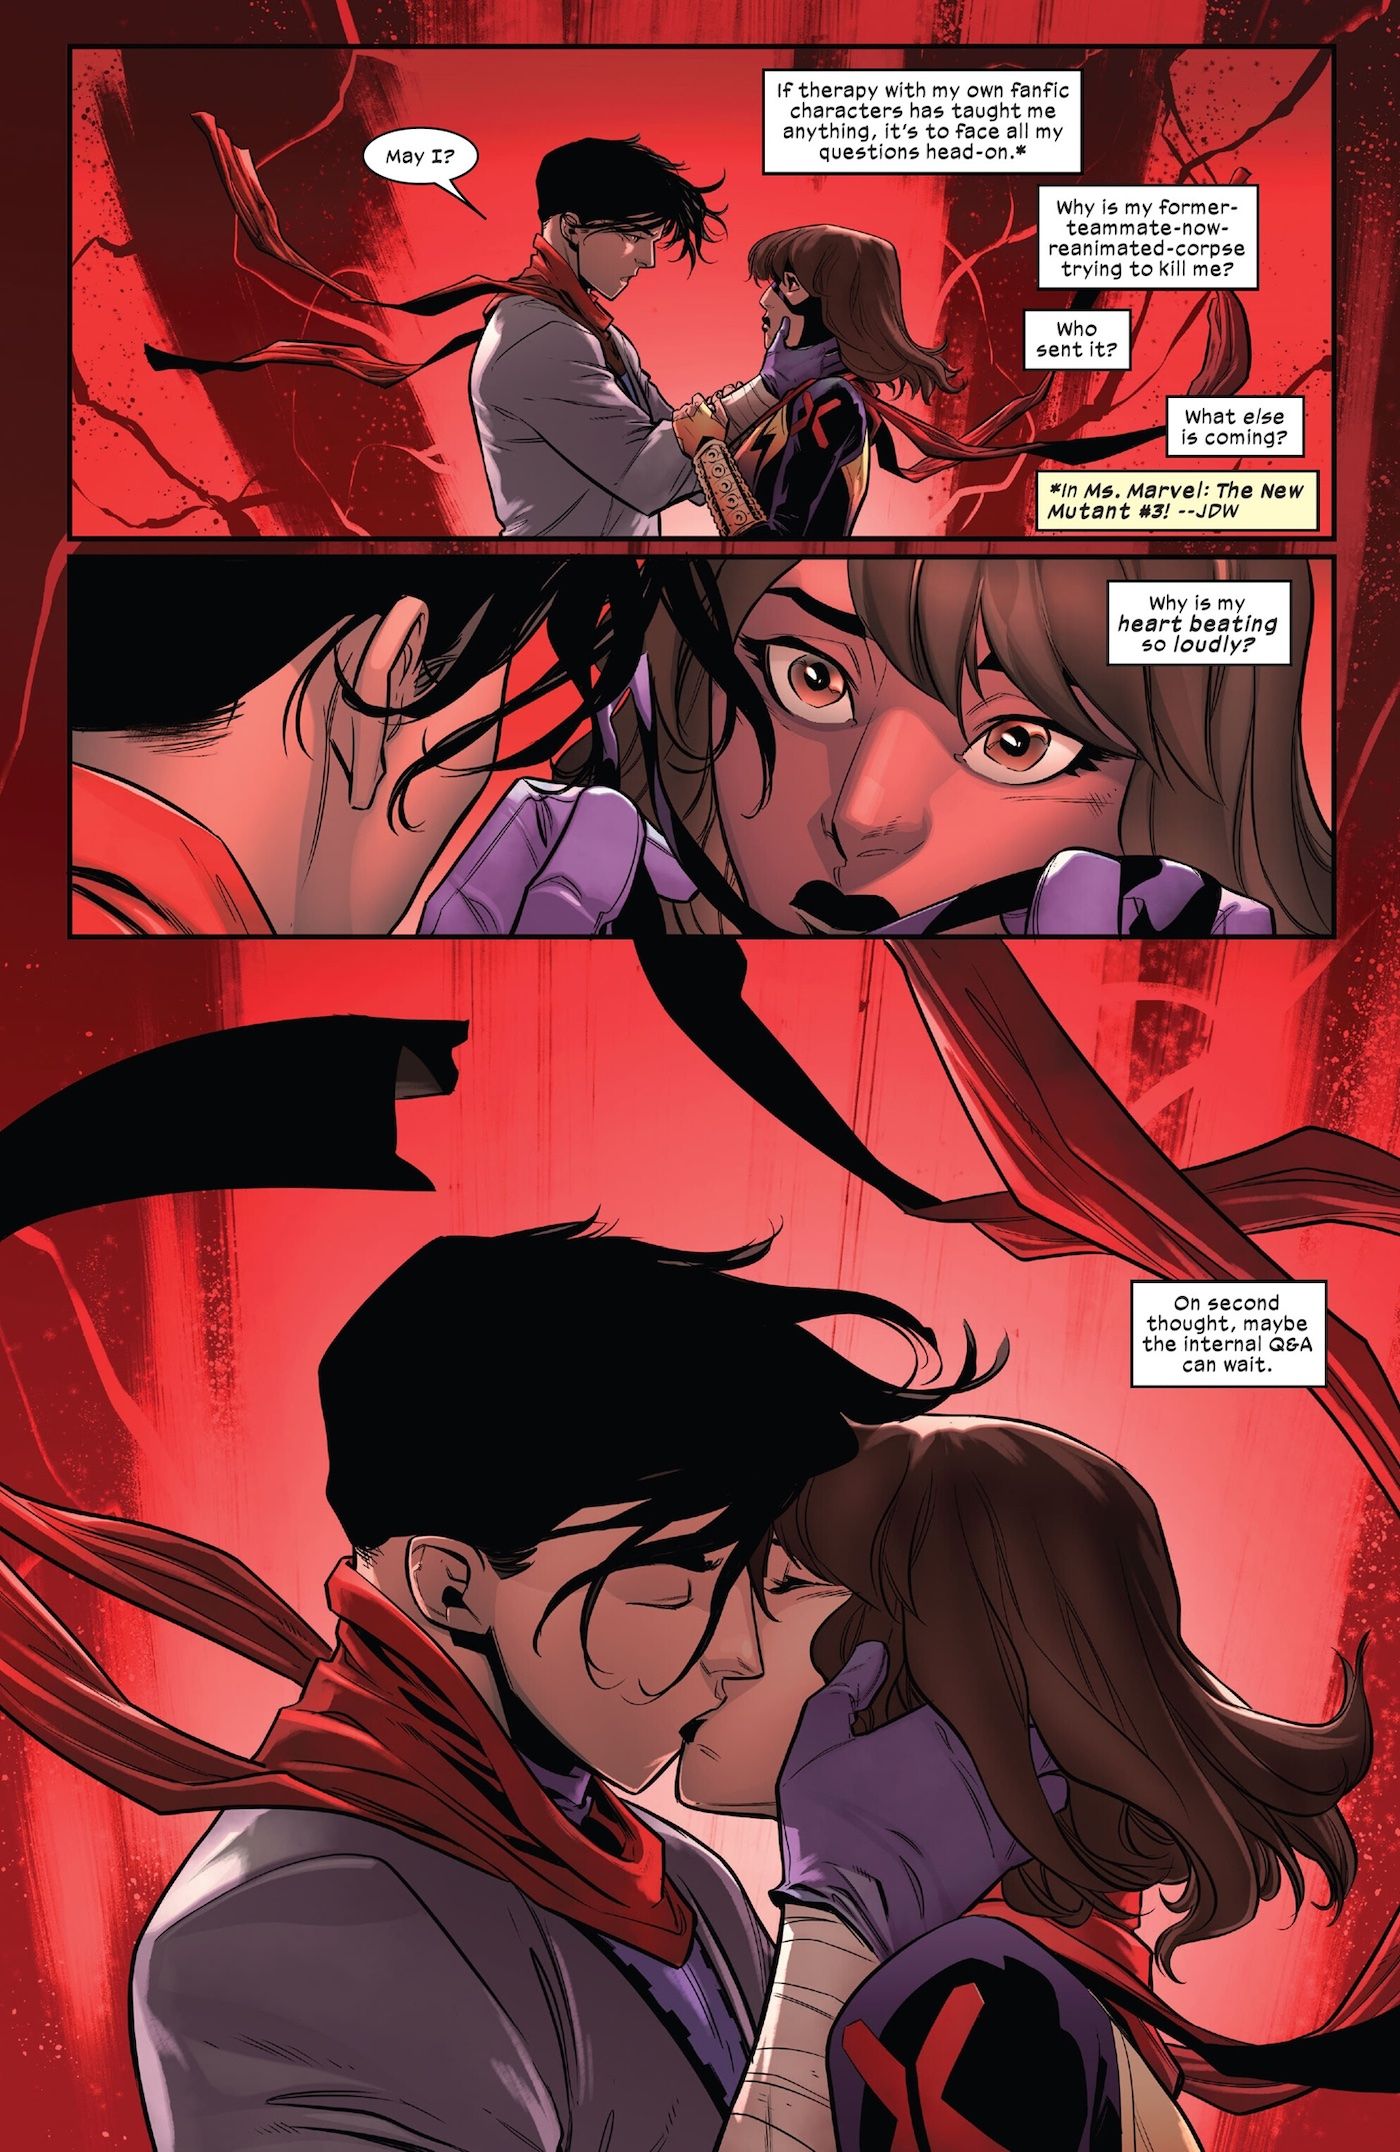 Kamala and Kareem Kiss while Zombie Cyclops' blasts fire in the air